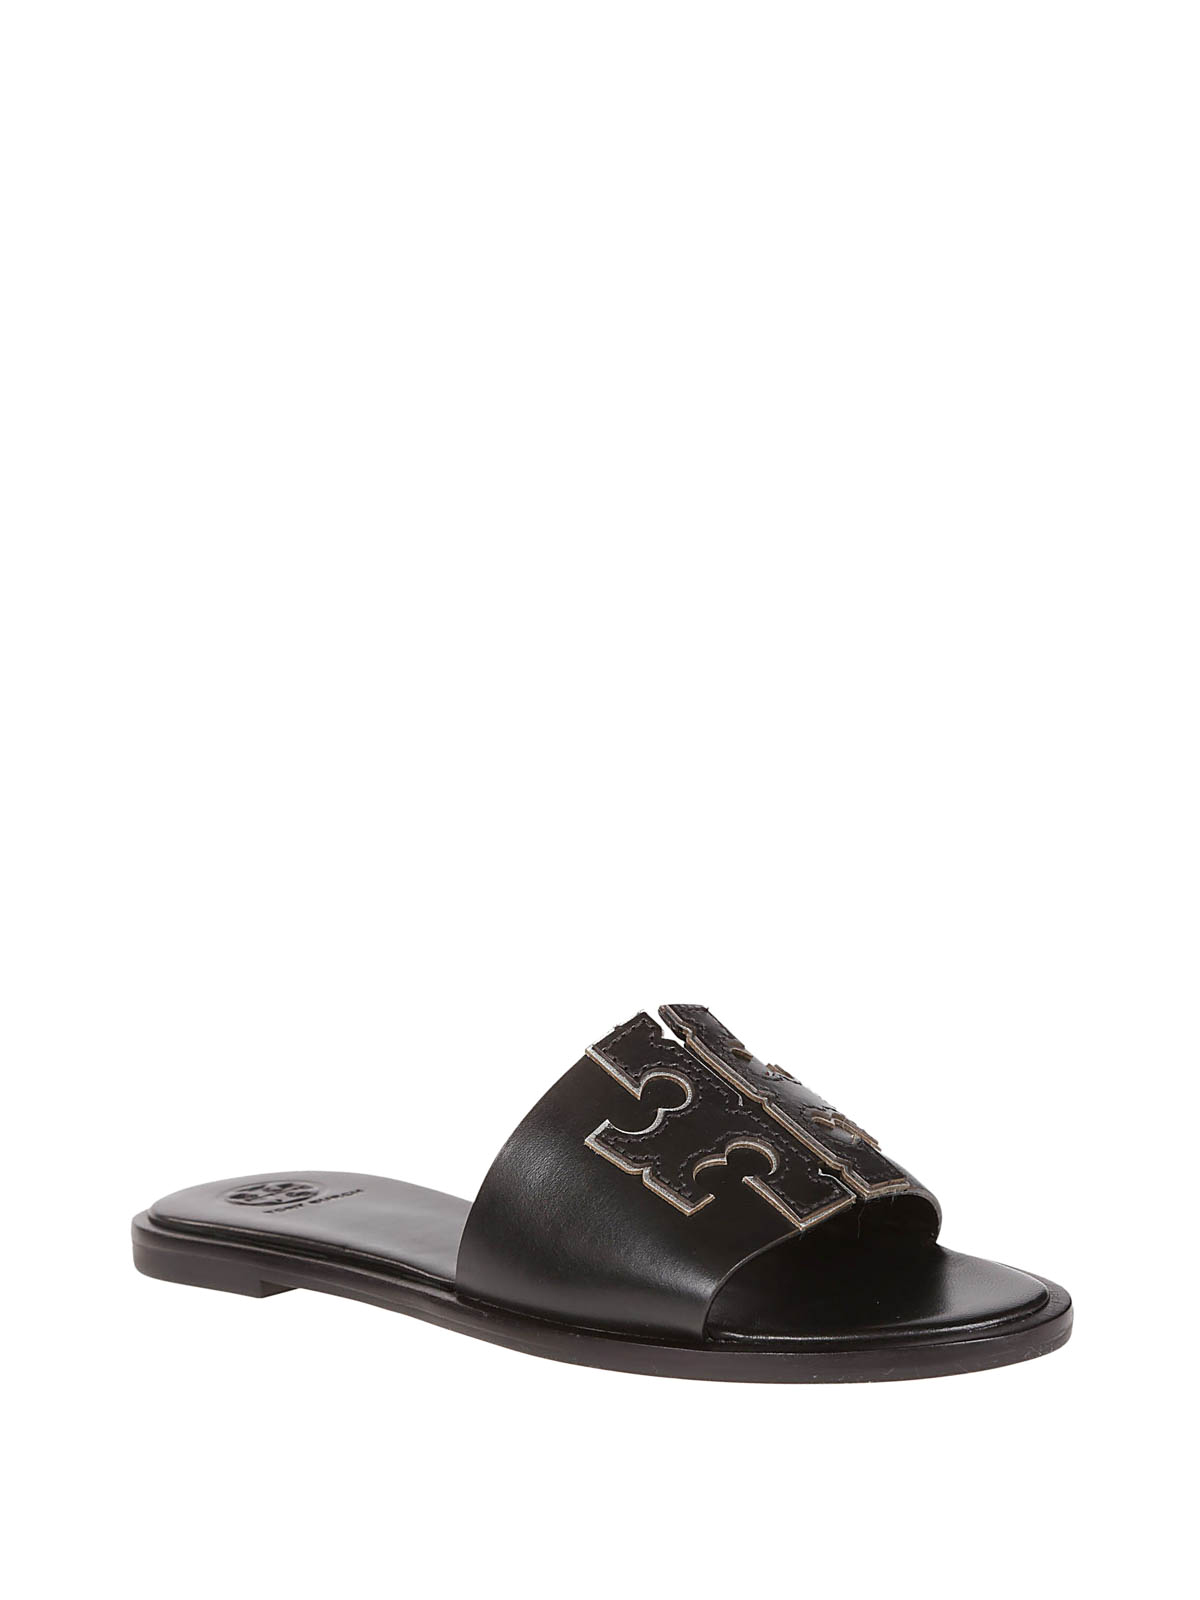 Sandals Tory Burch - Ines nappa leather slide sandals - 50109043